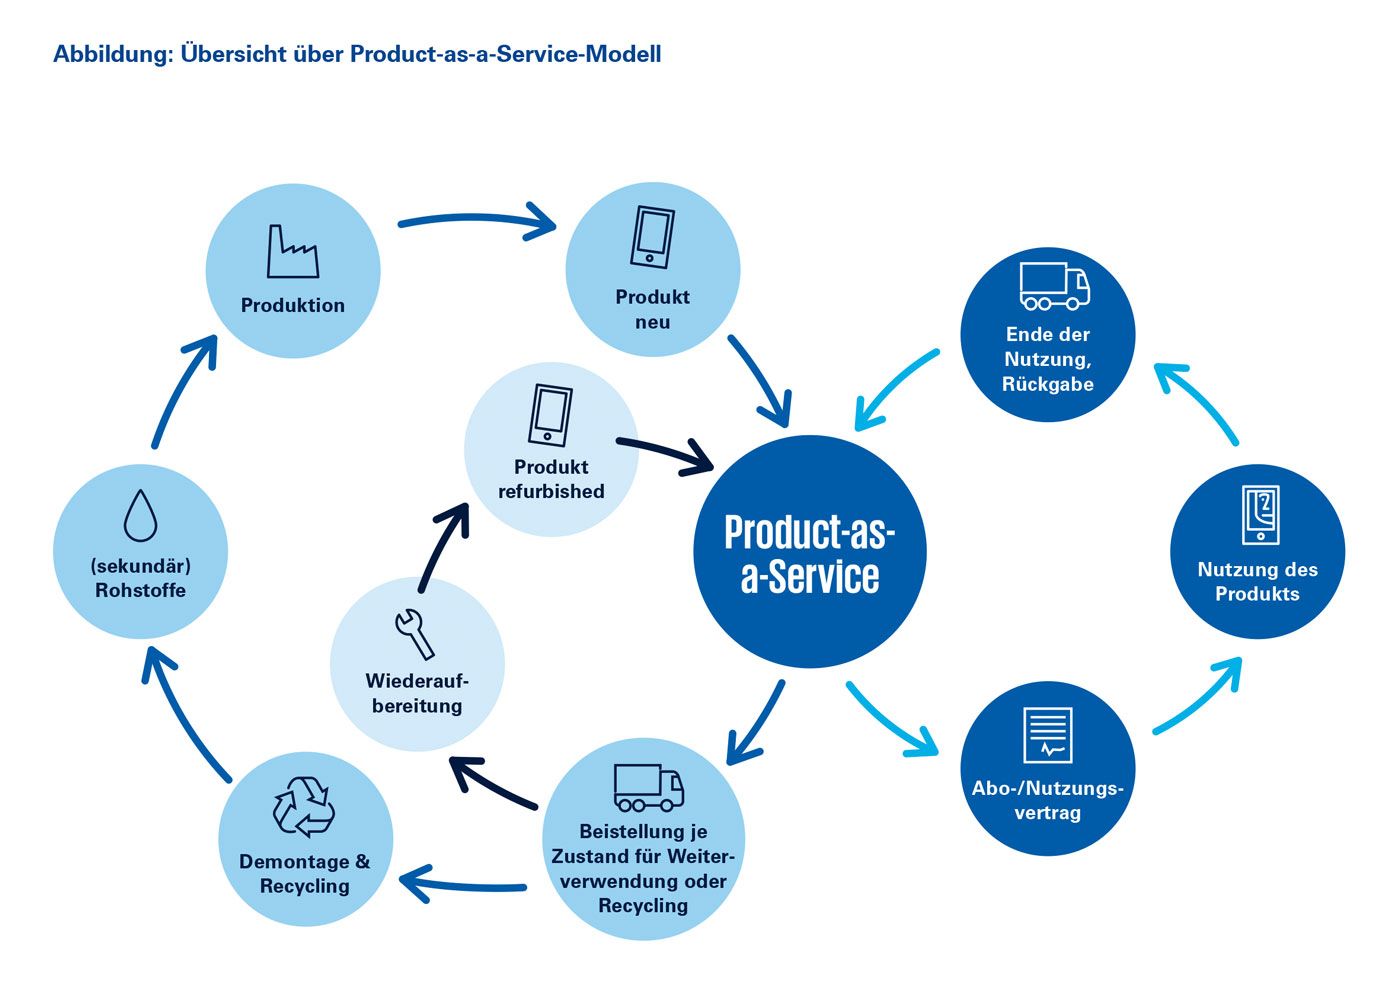 Product-as-a-Service-Modell